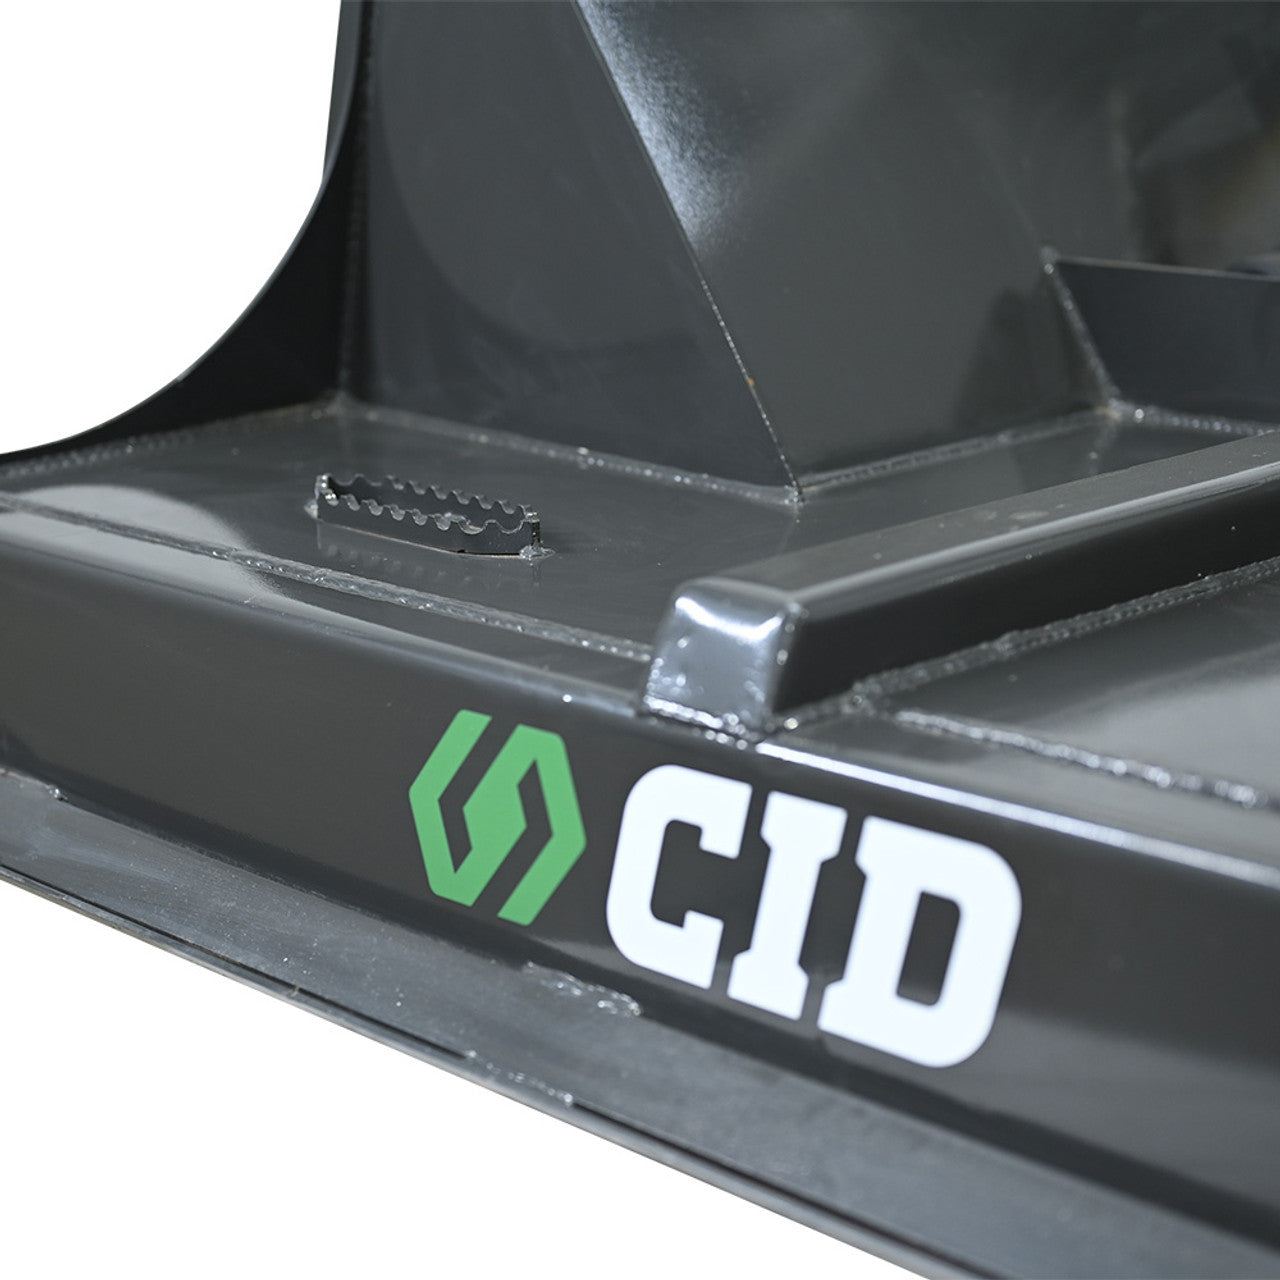 CID X-TREME BRUSH CUTTER WITH HIGH TORQUE MOTOR ATTACHMENT FOR SKID STEER